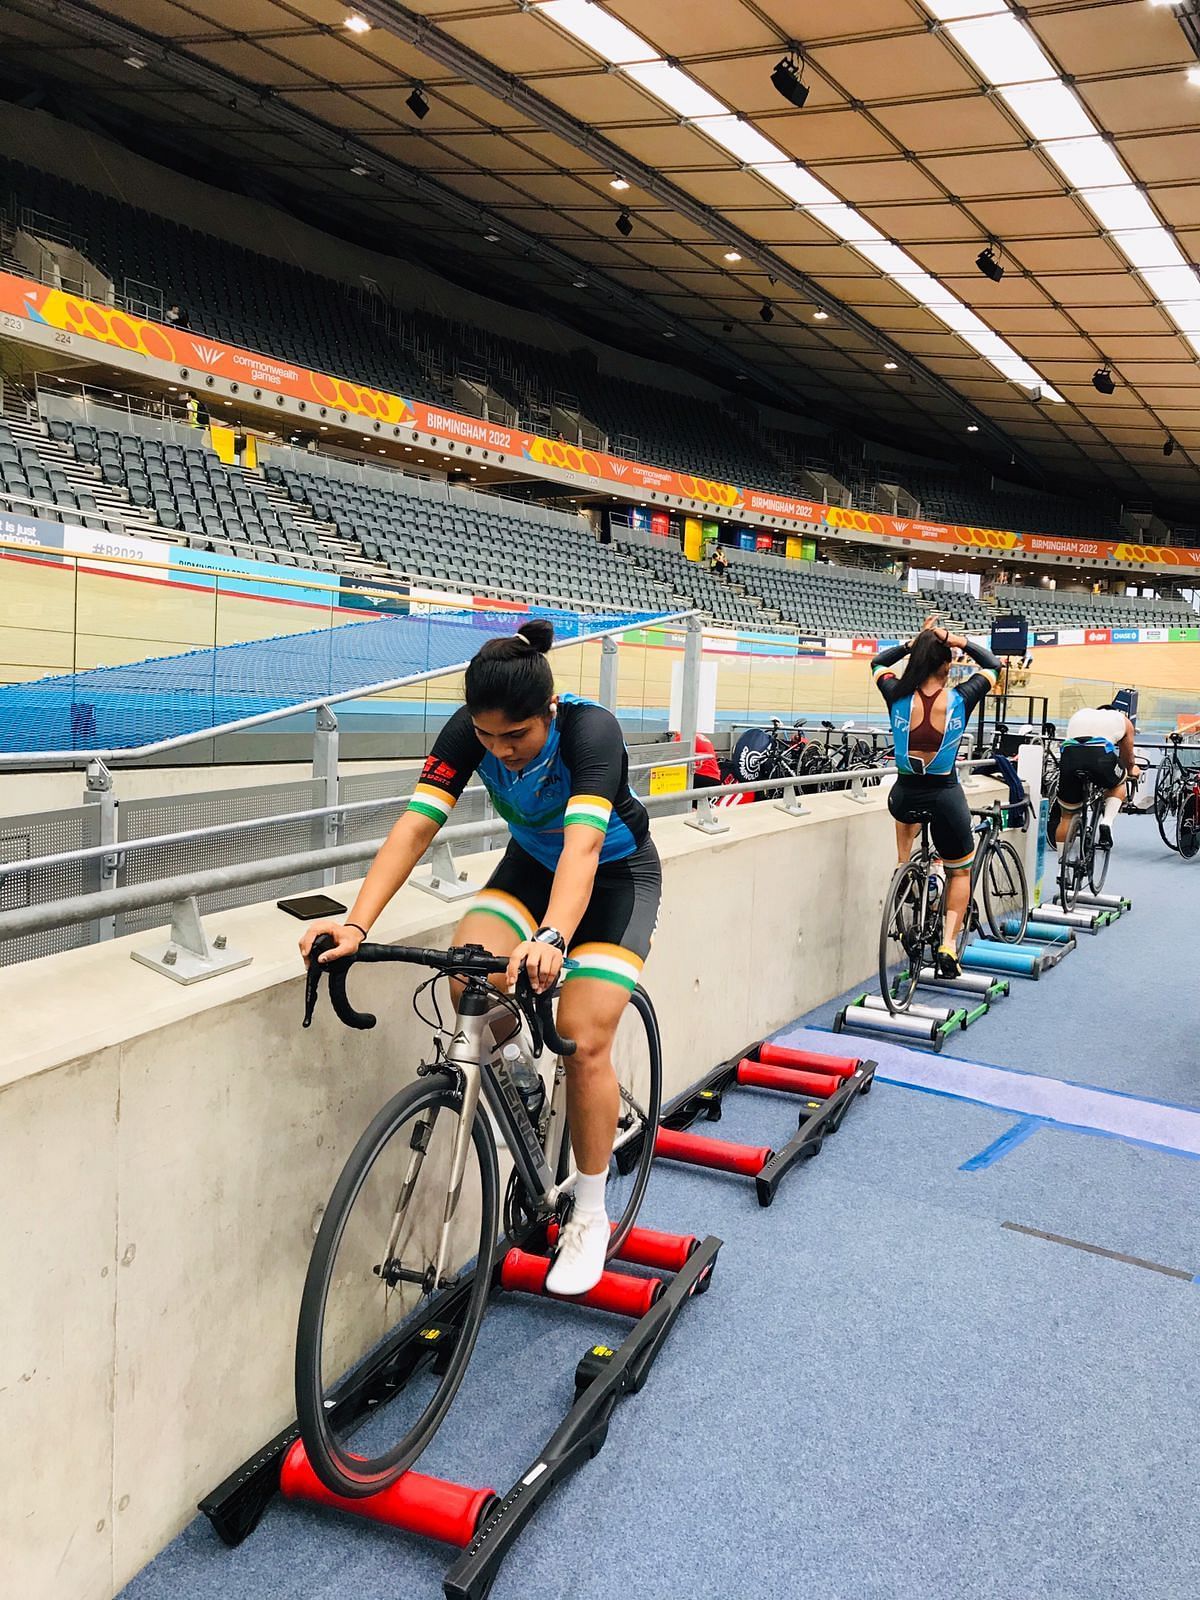 The Indian cycling team at a training session in the CWG 2022 Games Village. (PC: SAI)